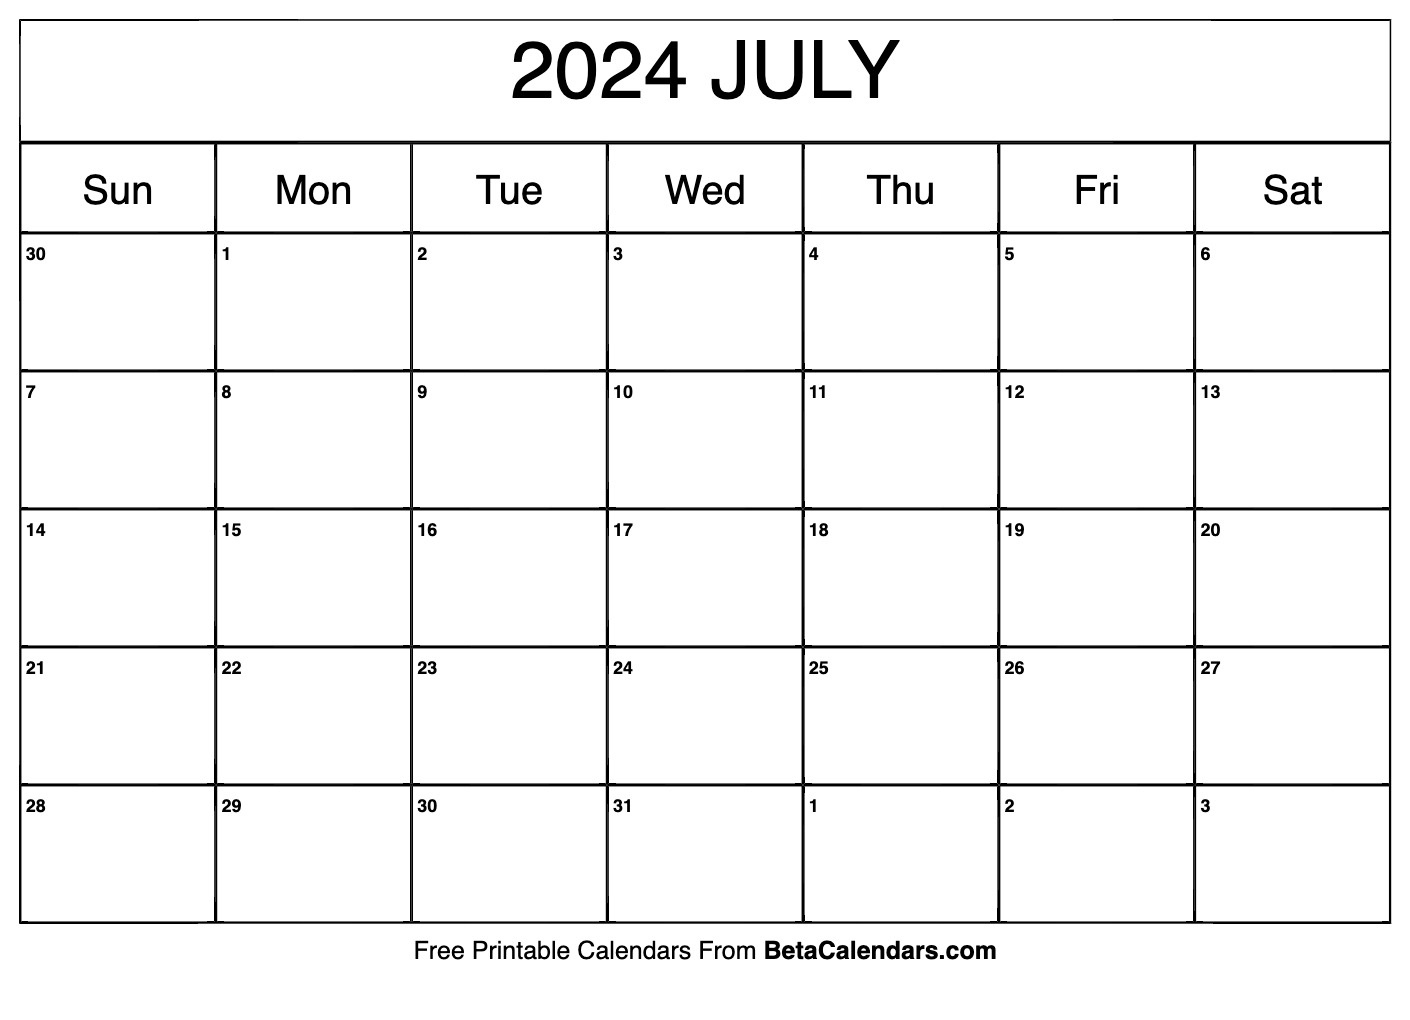 Free Printable July 2024 Calendar pertaining to Blank Monthly Calendar July 2024